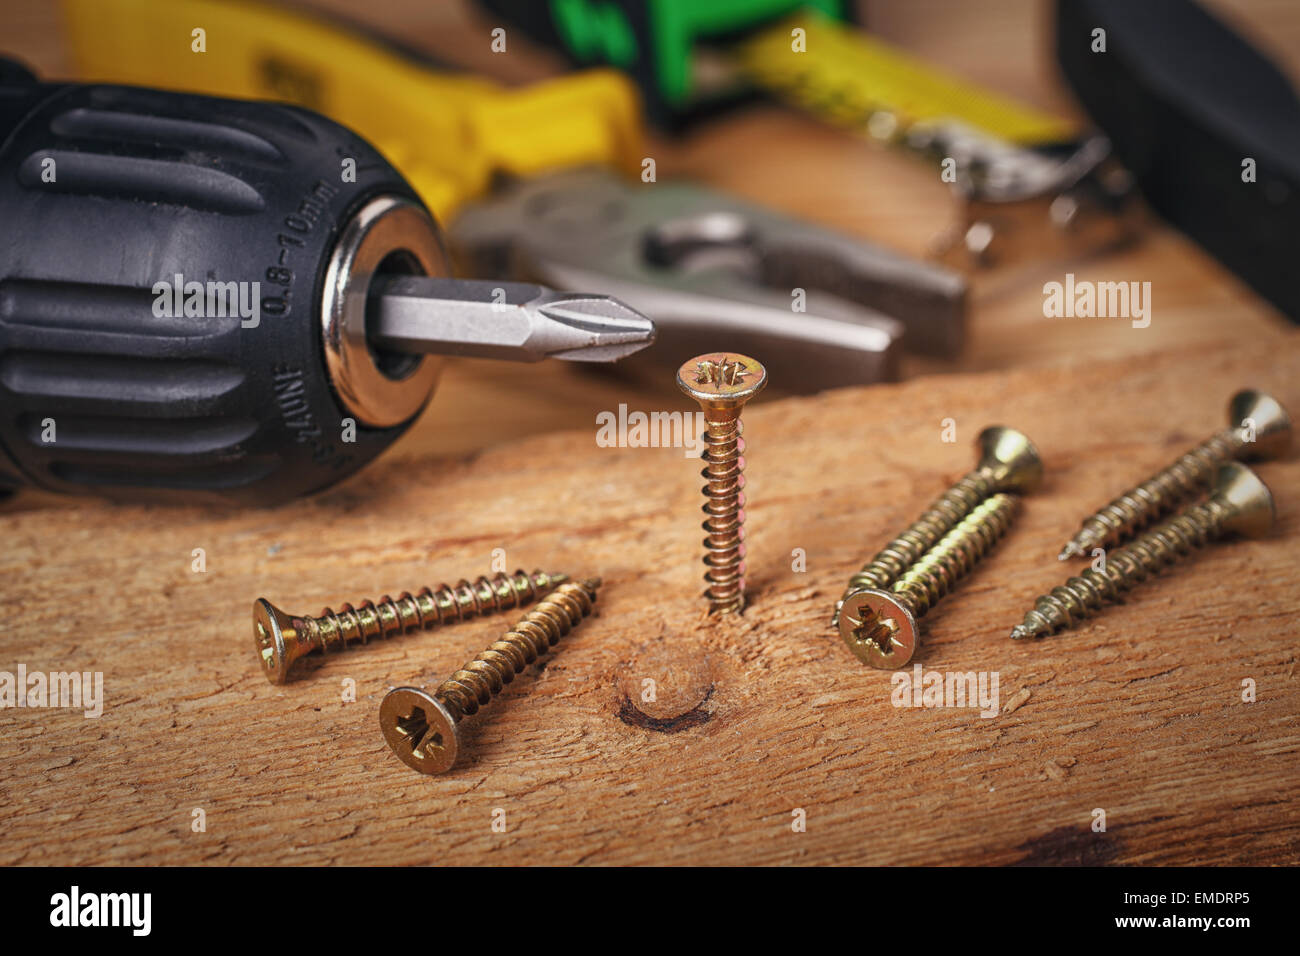 Wood screws and carpentry tools Stock Photo